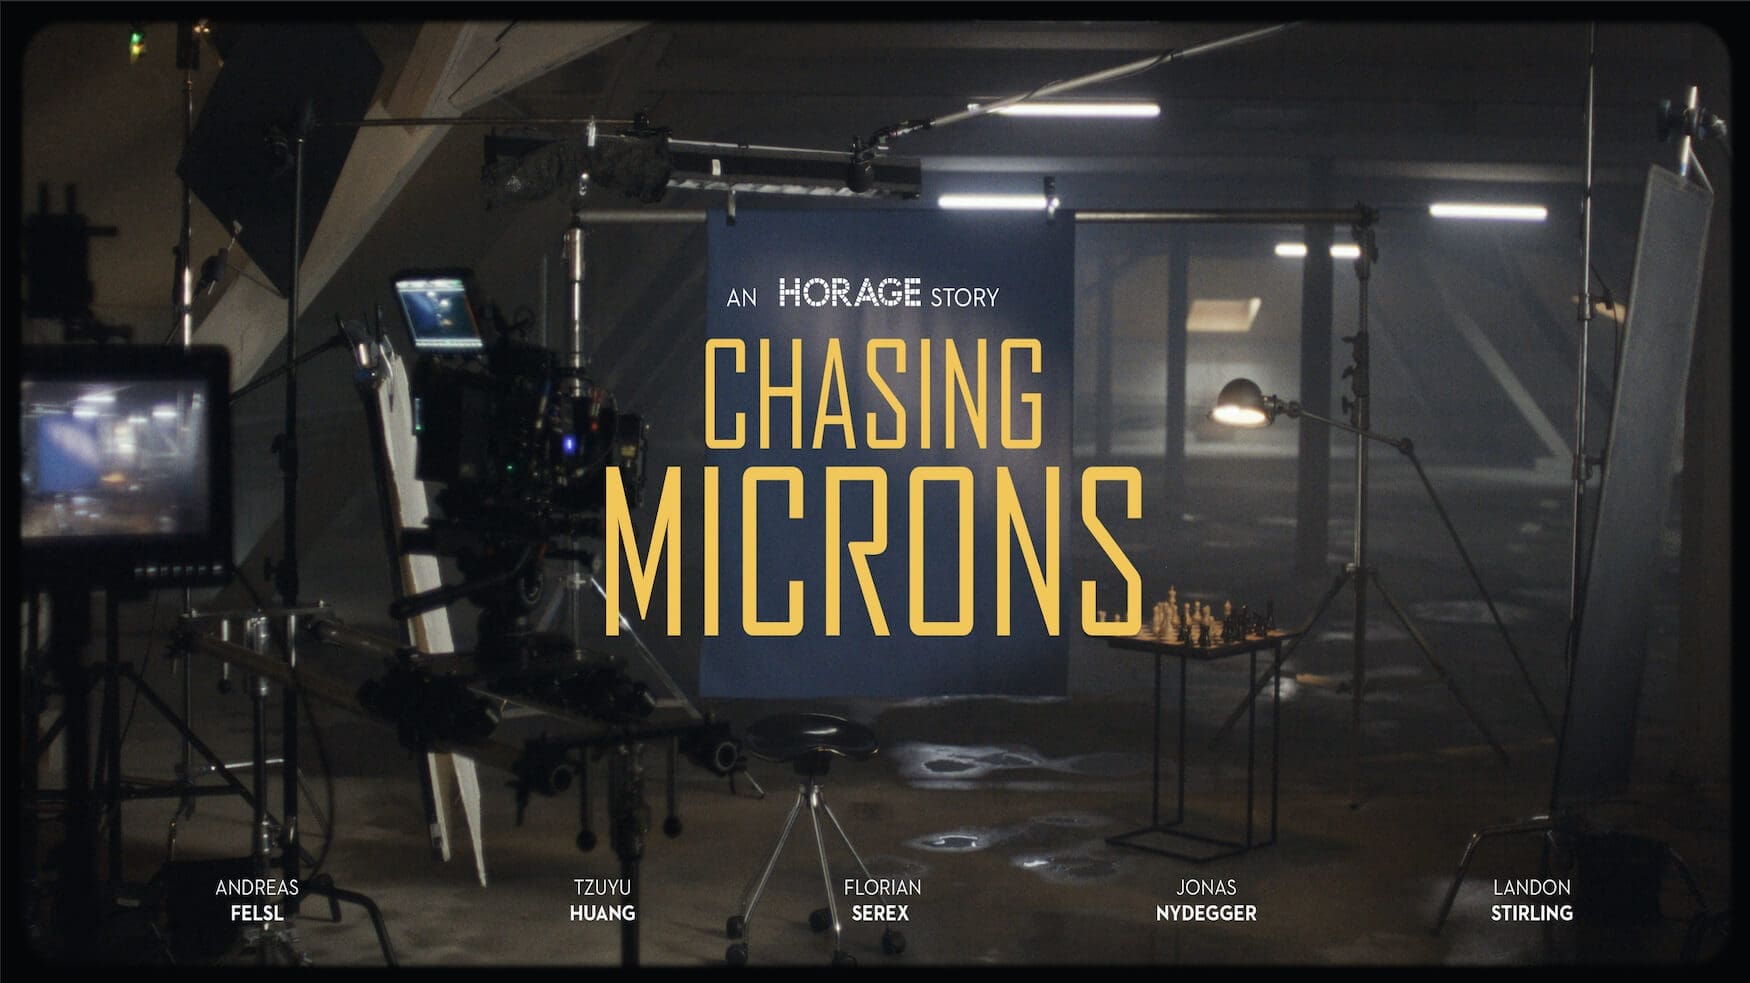 You can now watch the Horage “Chasing Microns” documentary in full